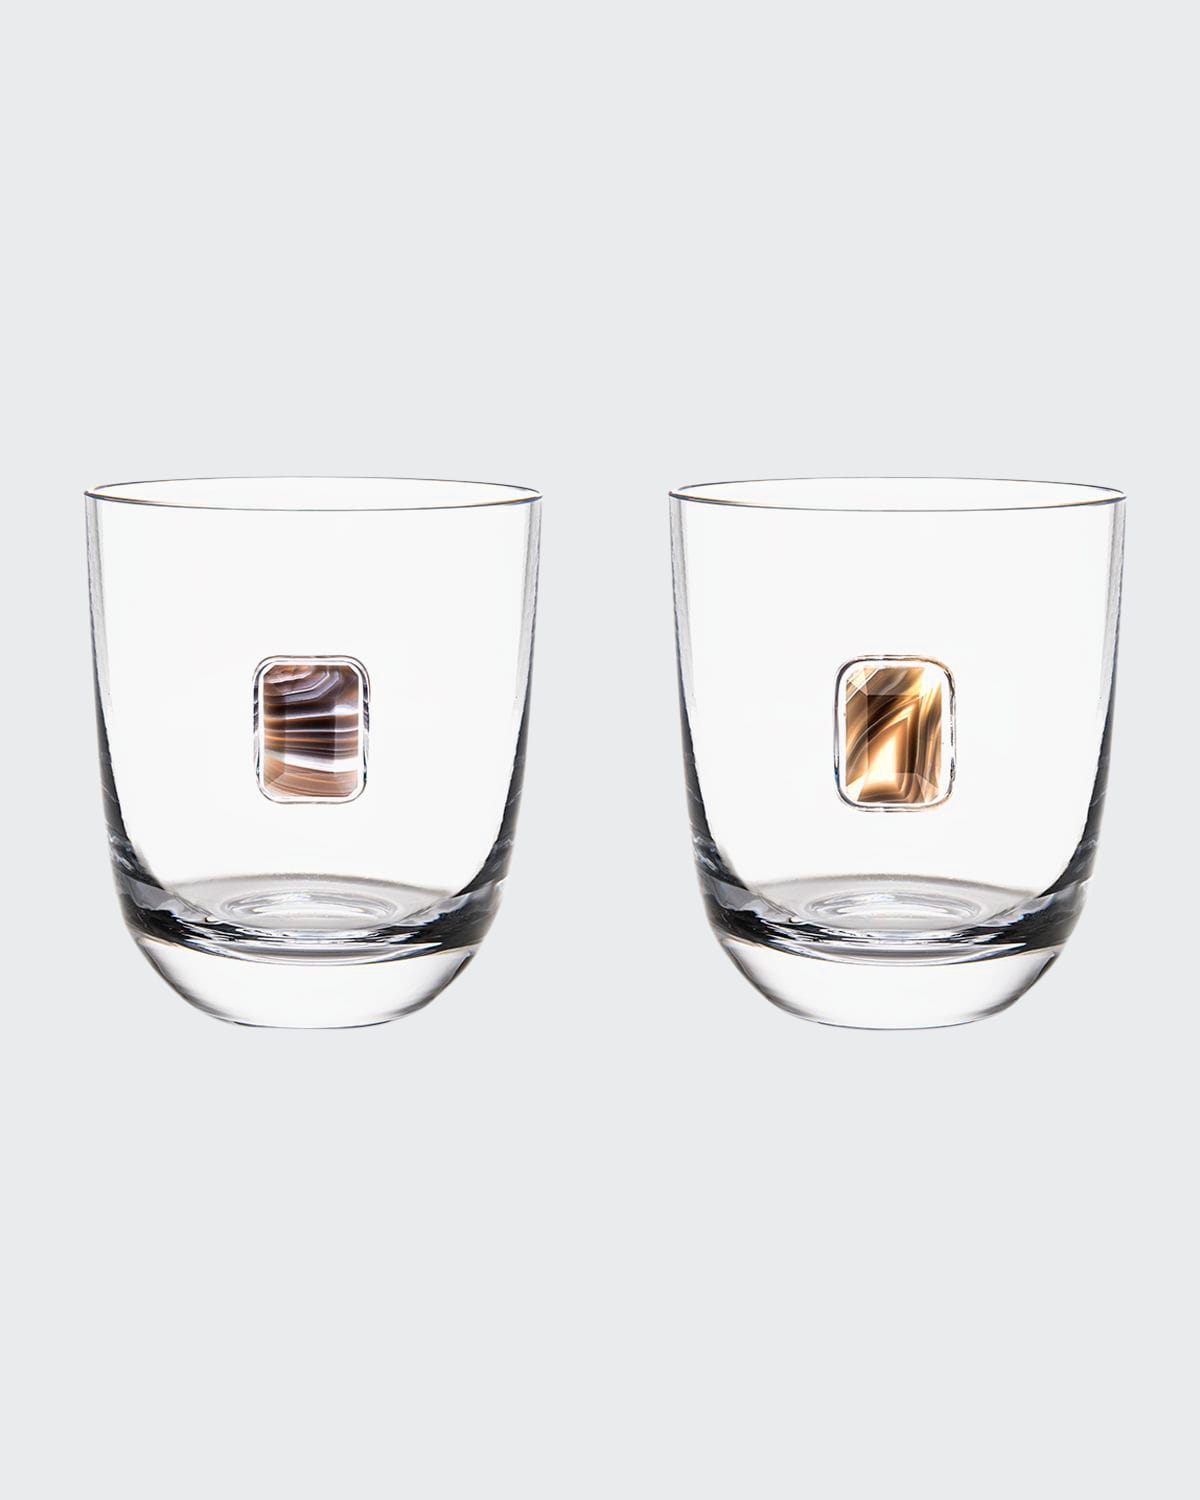 ANNA New York Elevo Double Old-Fashioned Glasses, Set of 2